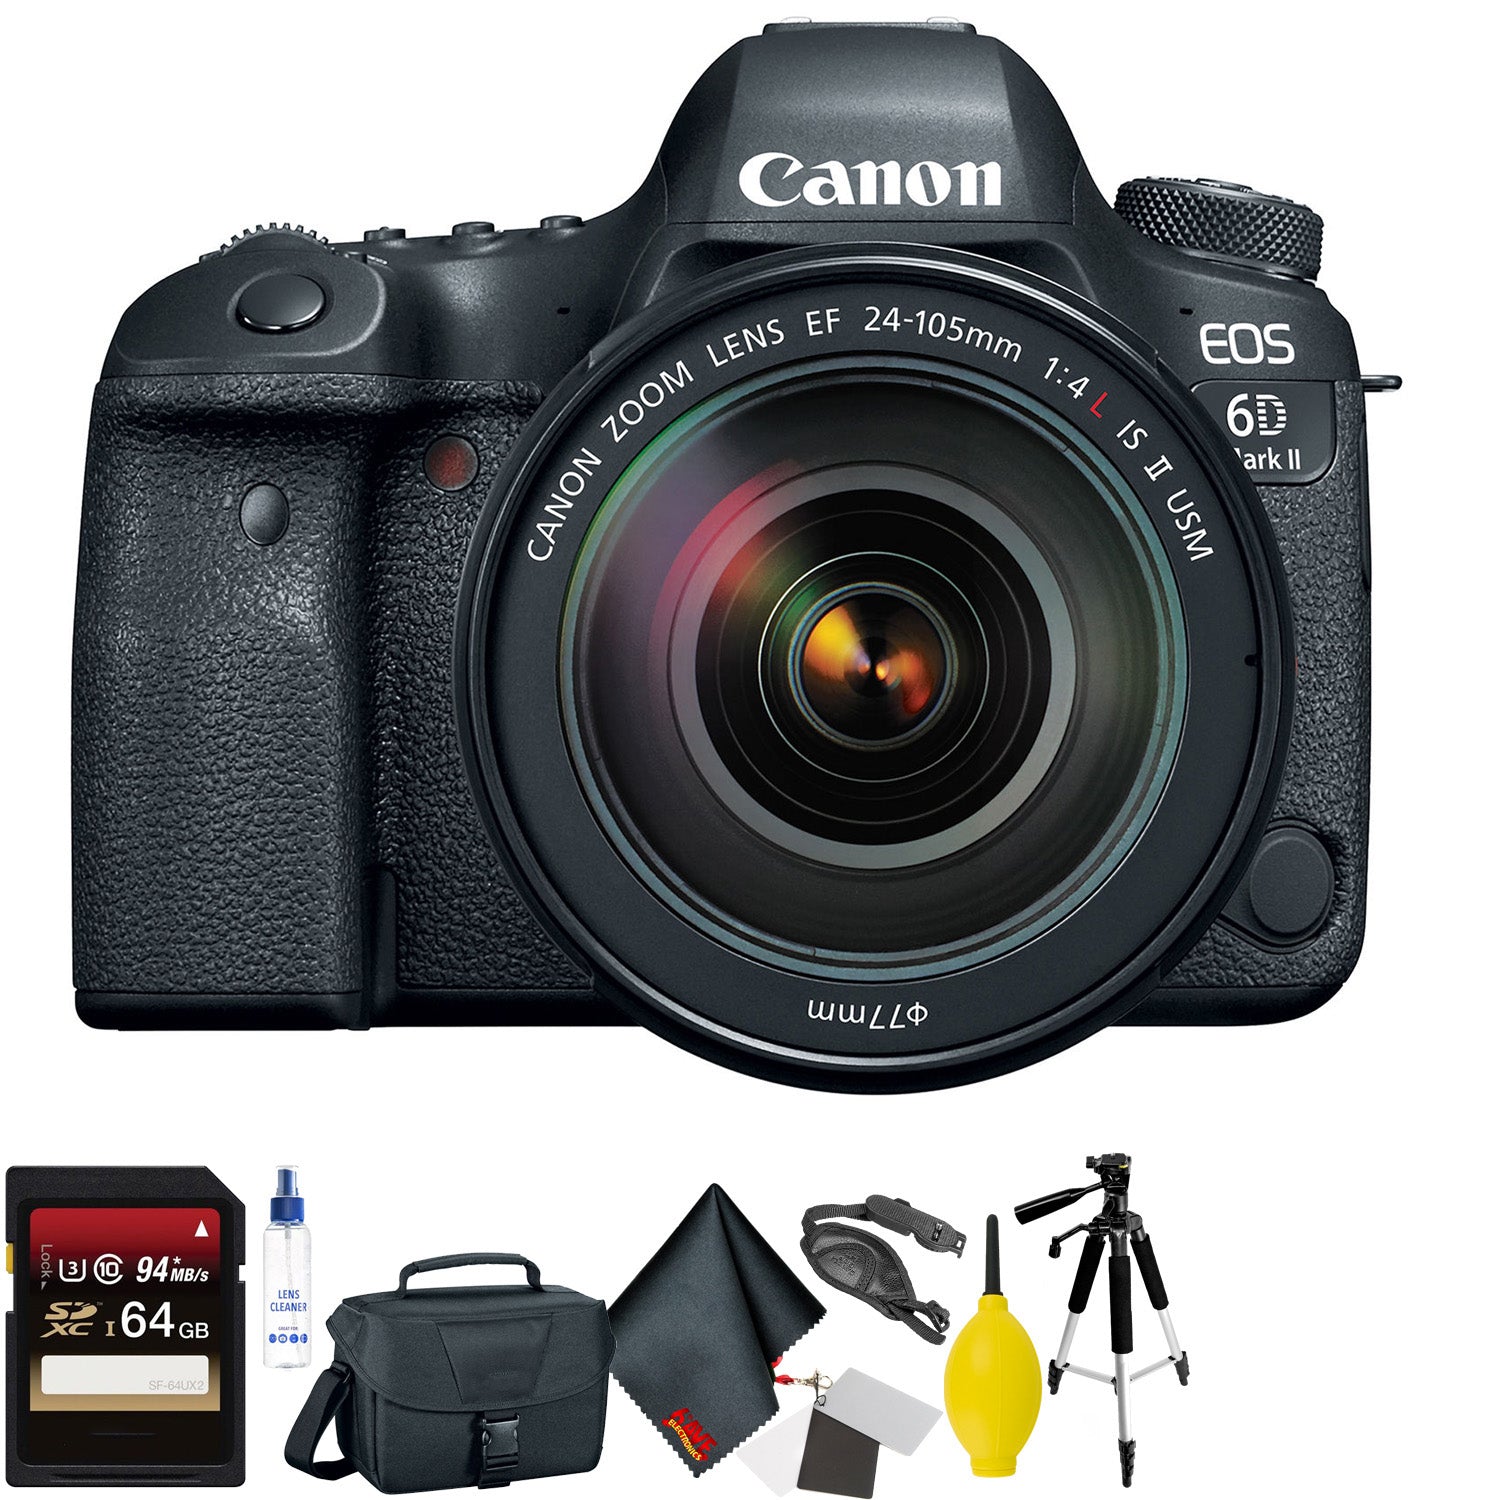 Canon EOS 6D Mark II DSLR Camera with 24-105mm f/4L II Lens + 64GB Memory Card + Mega Accessory Kit + 2 Year Accidental